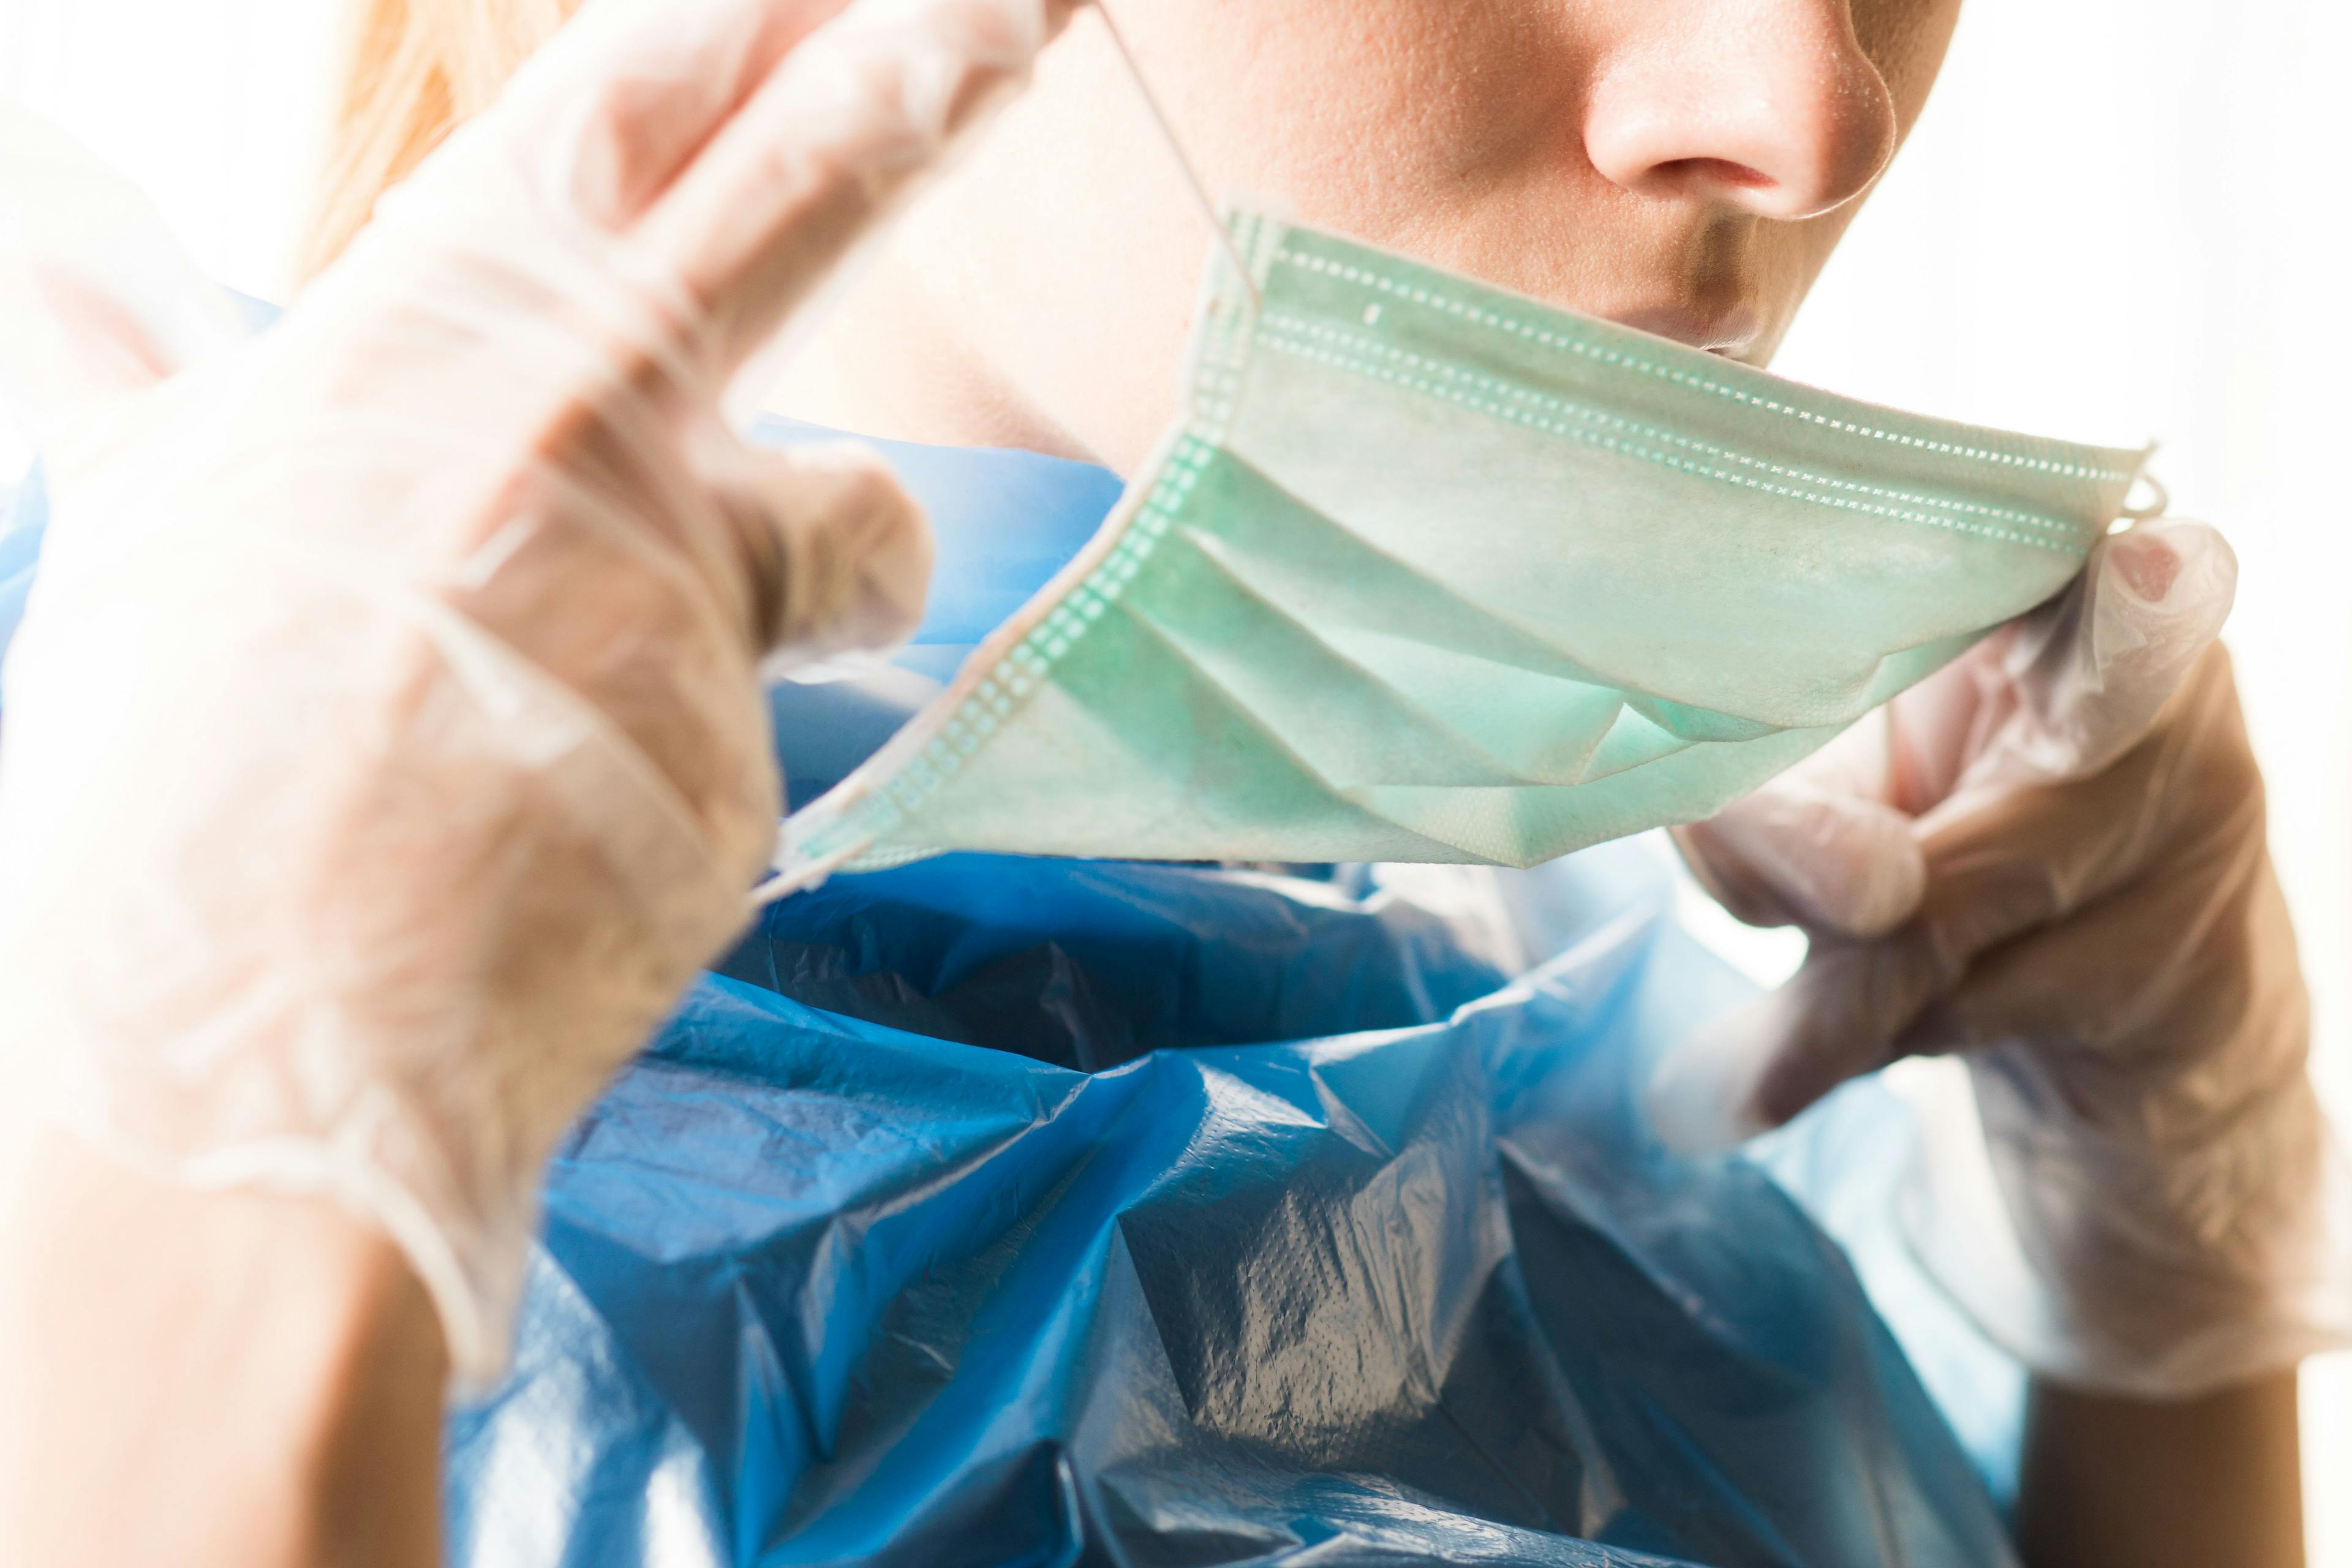 PPE for dental staff is critical during a pandemic.